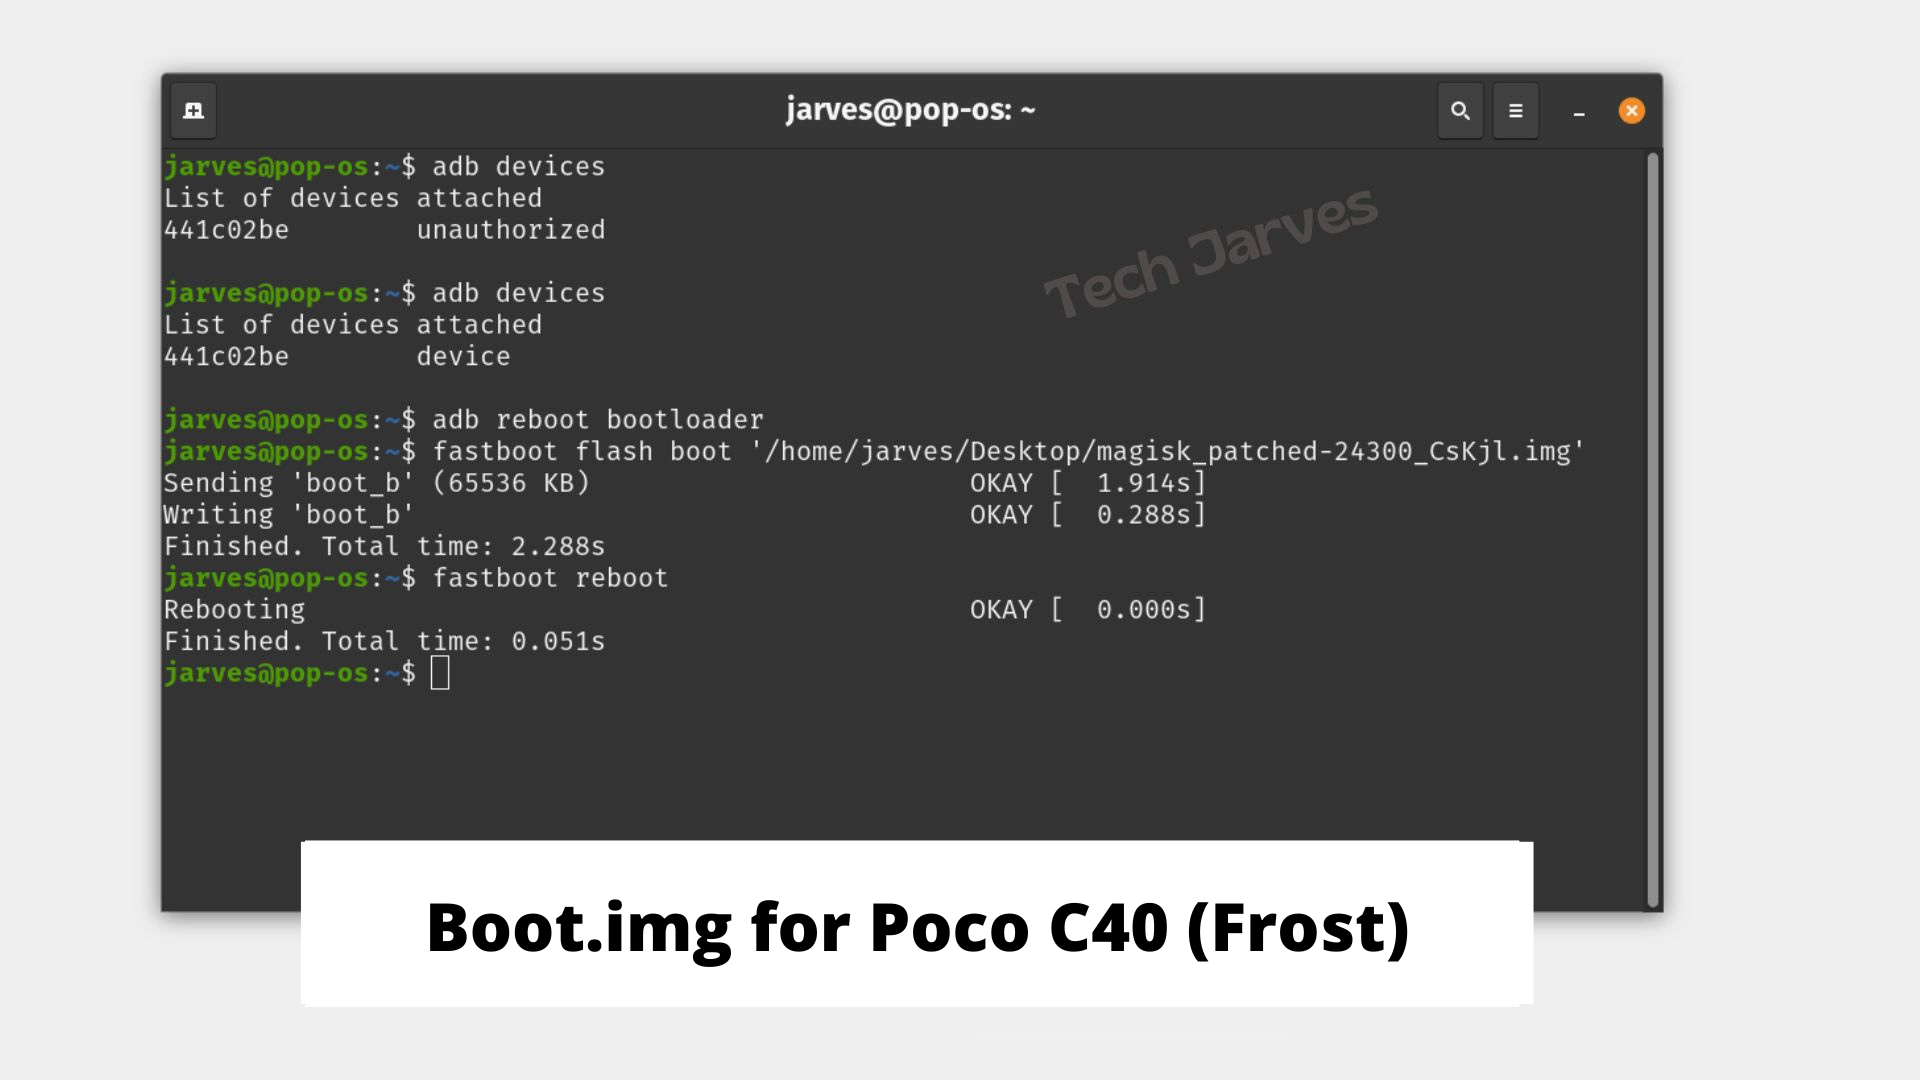 Boot.img for Poco C40 frost